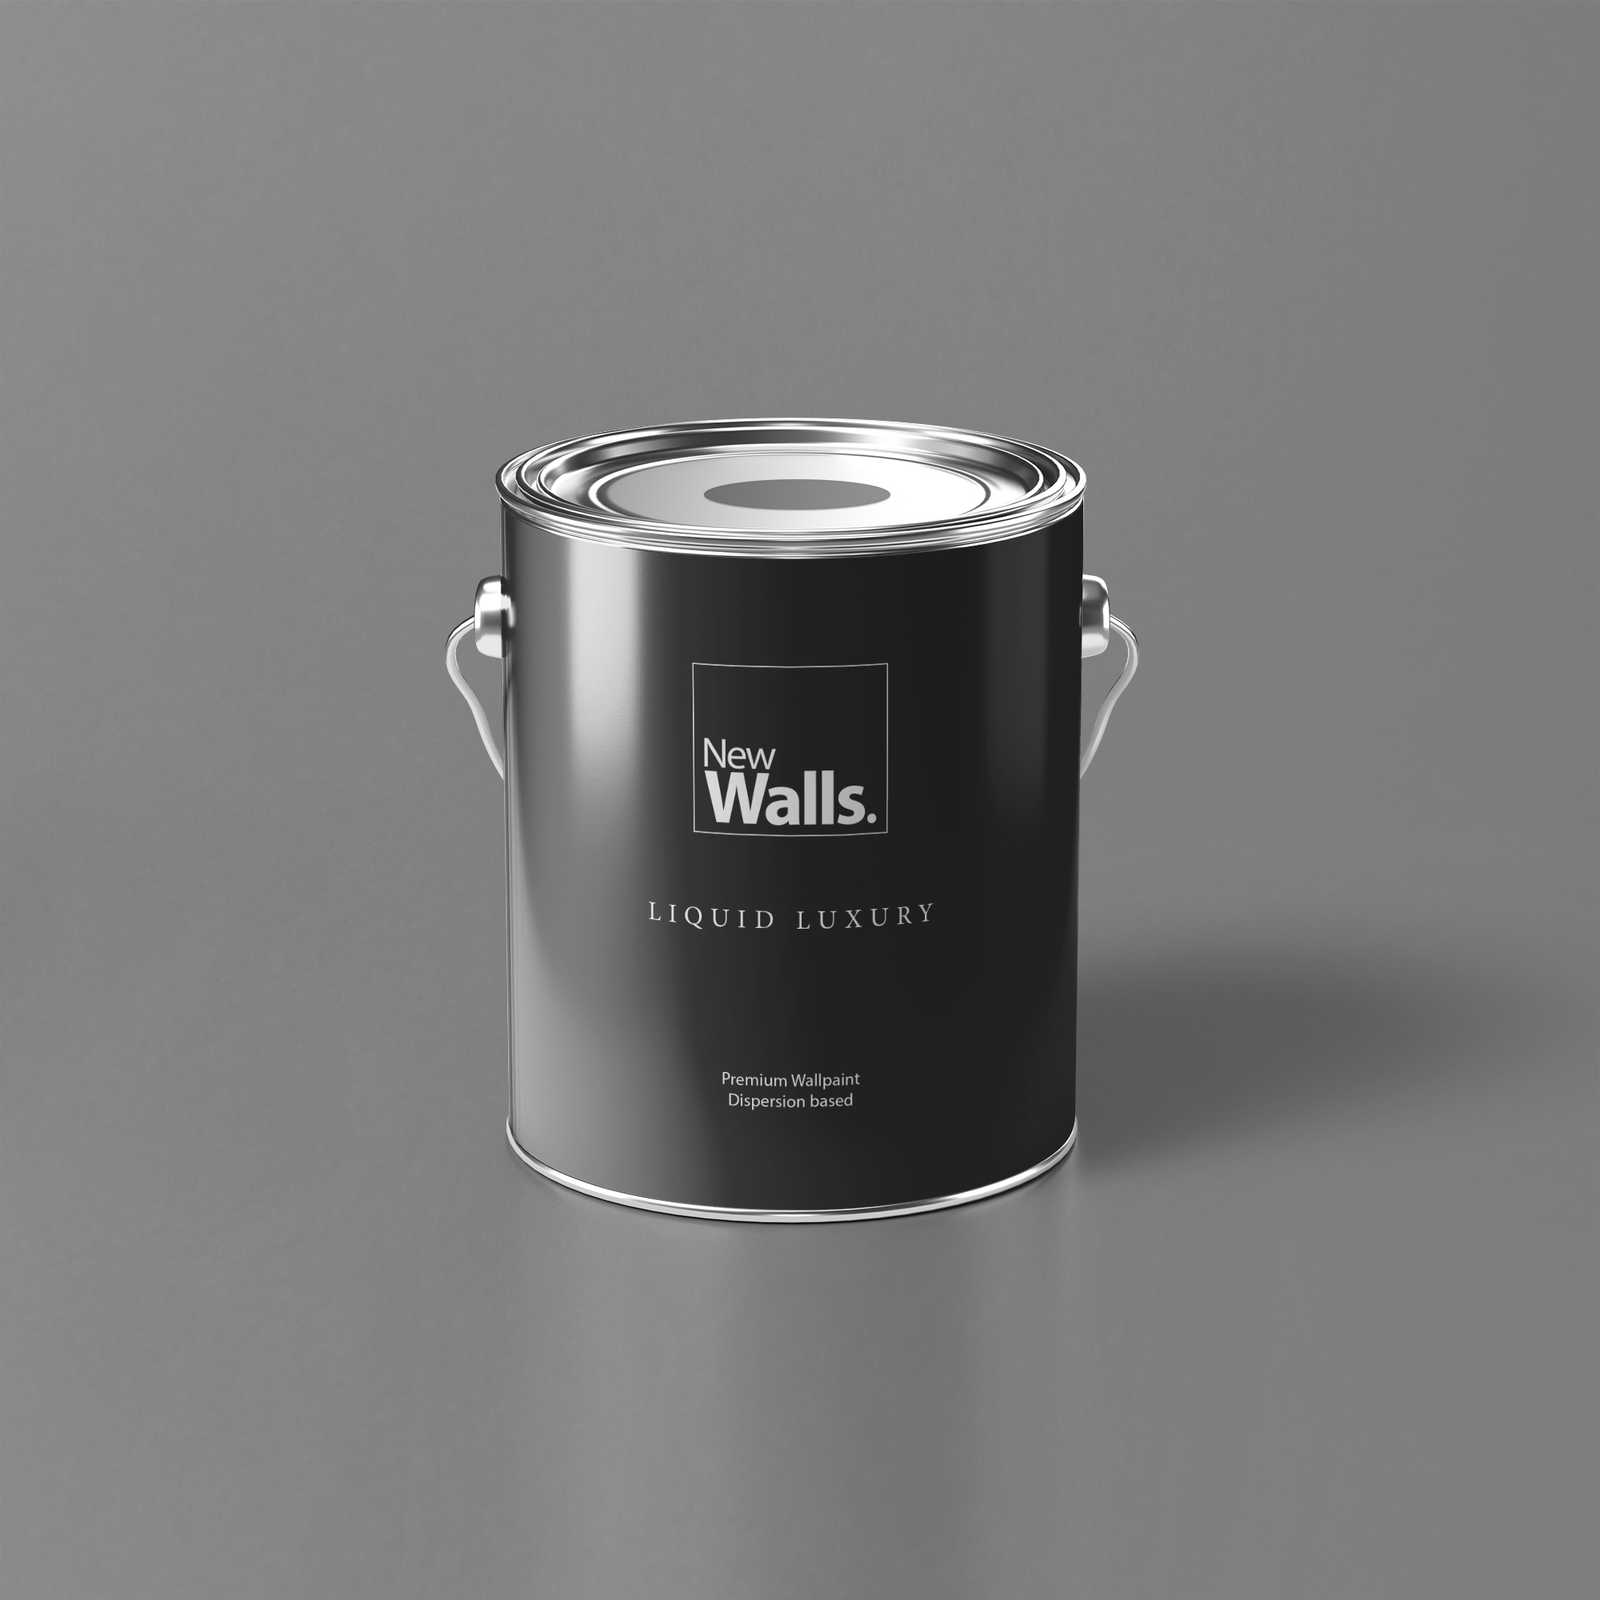 Premium Wall Paint Convincing Stone Grey »Industrial Grey« NW103 – 5 litre
